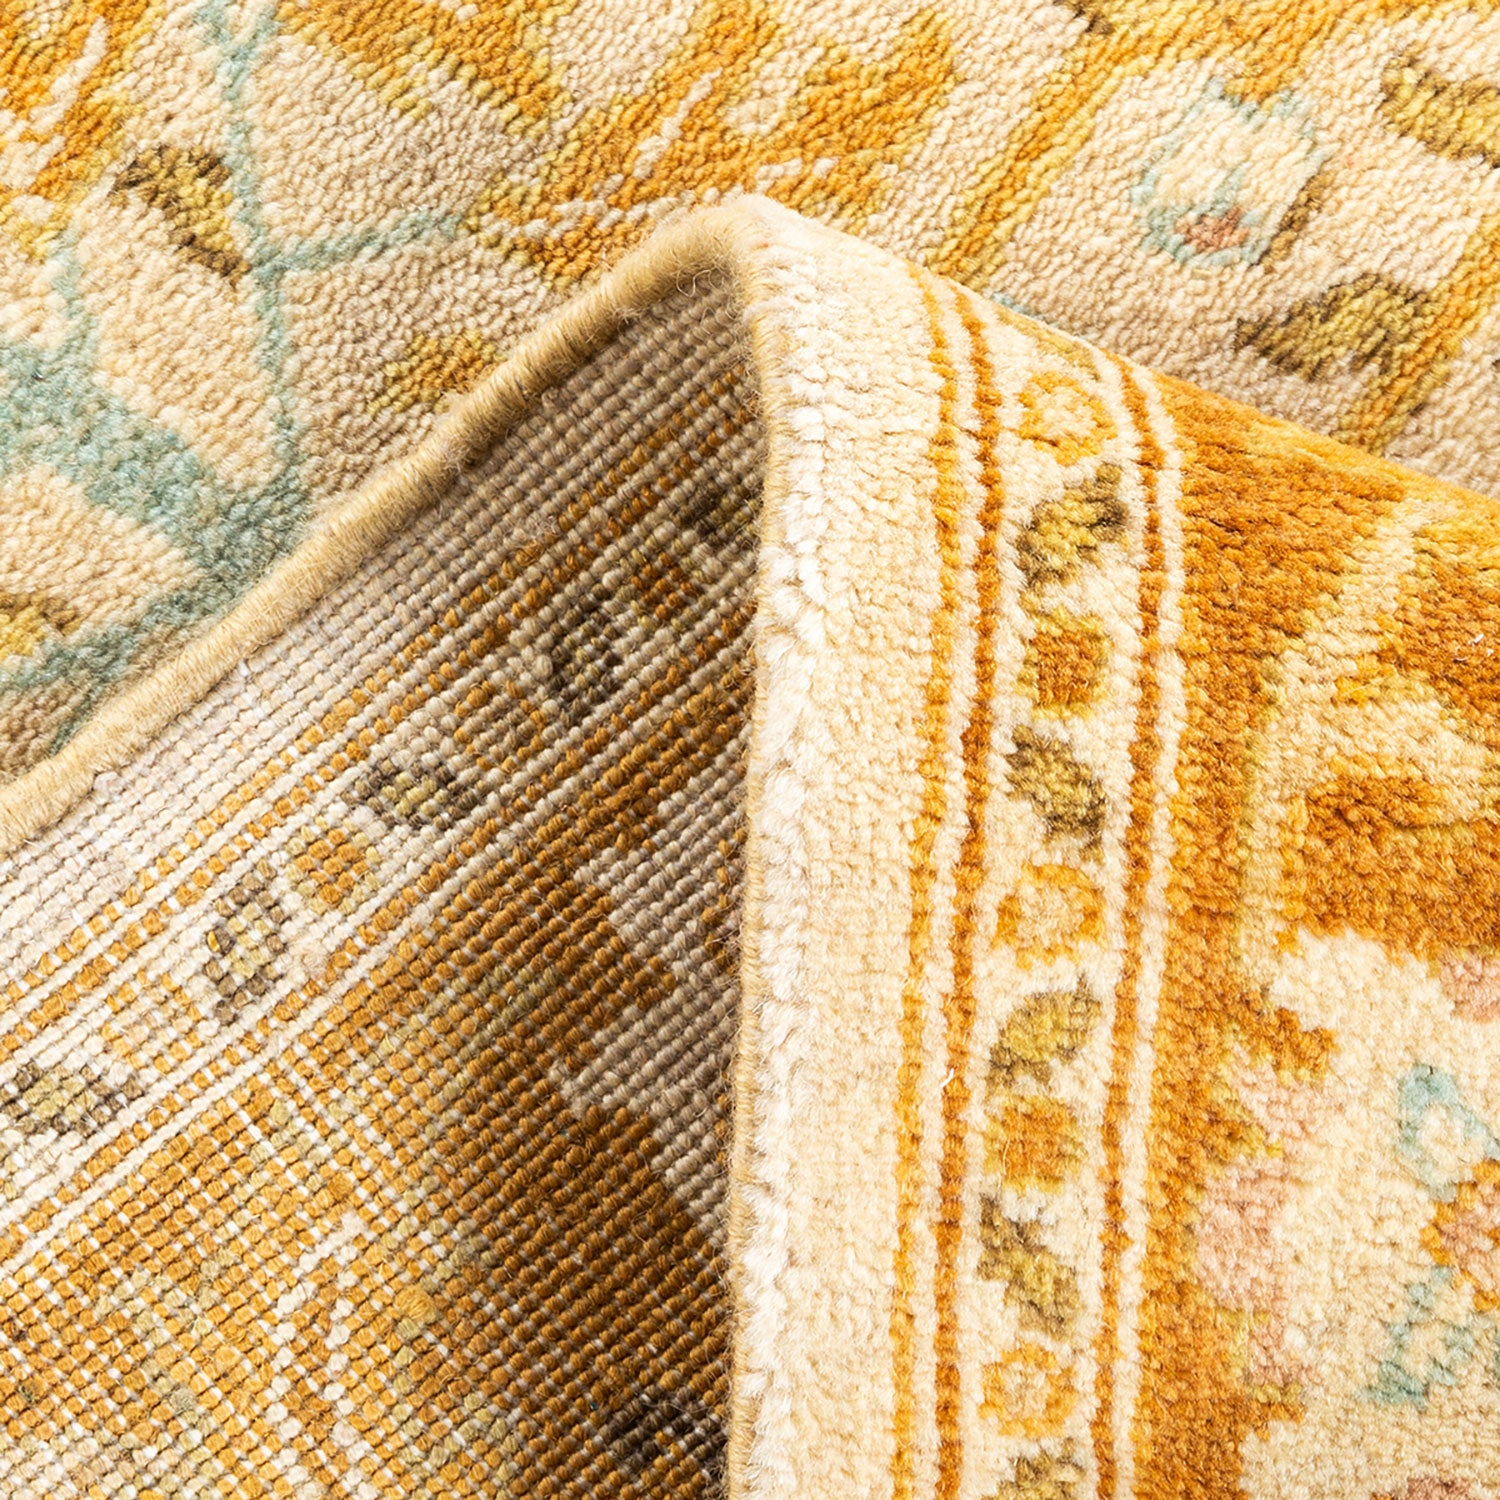 Vibrant and detailed close-up of high-quality folded area rug.